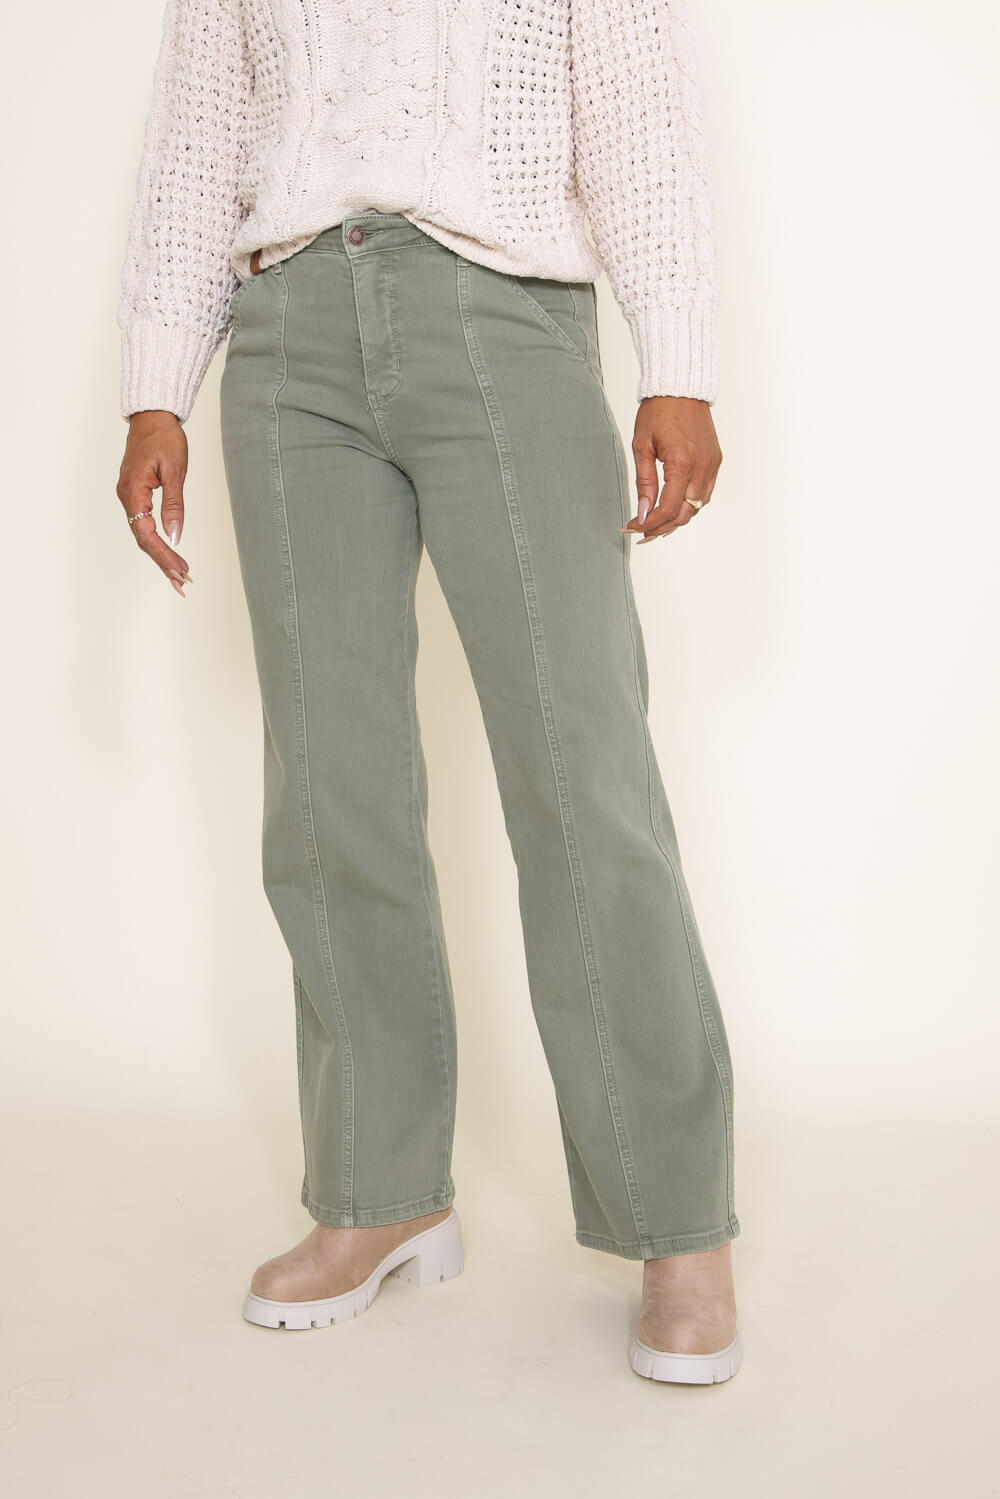 Buy Gold Cotton Solid Straight Pants Online in India